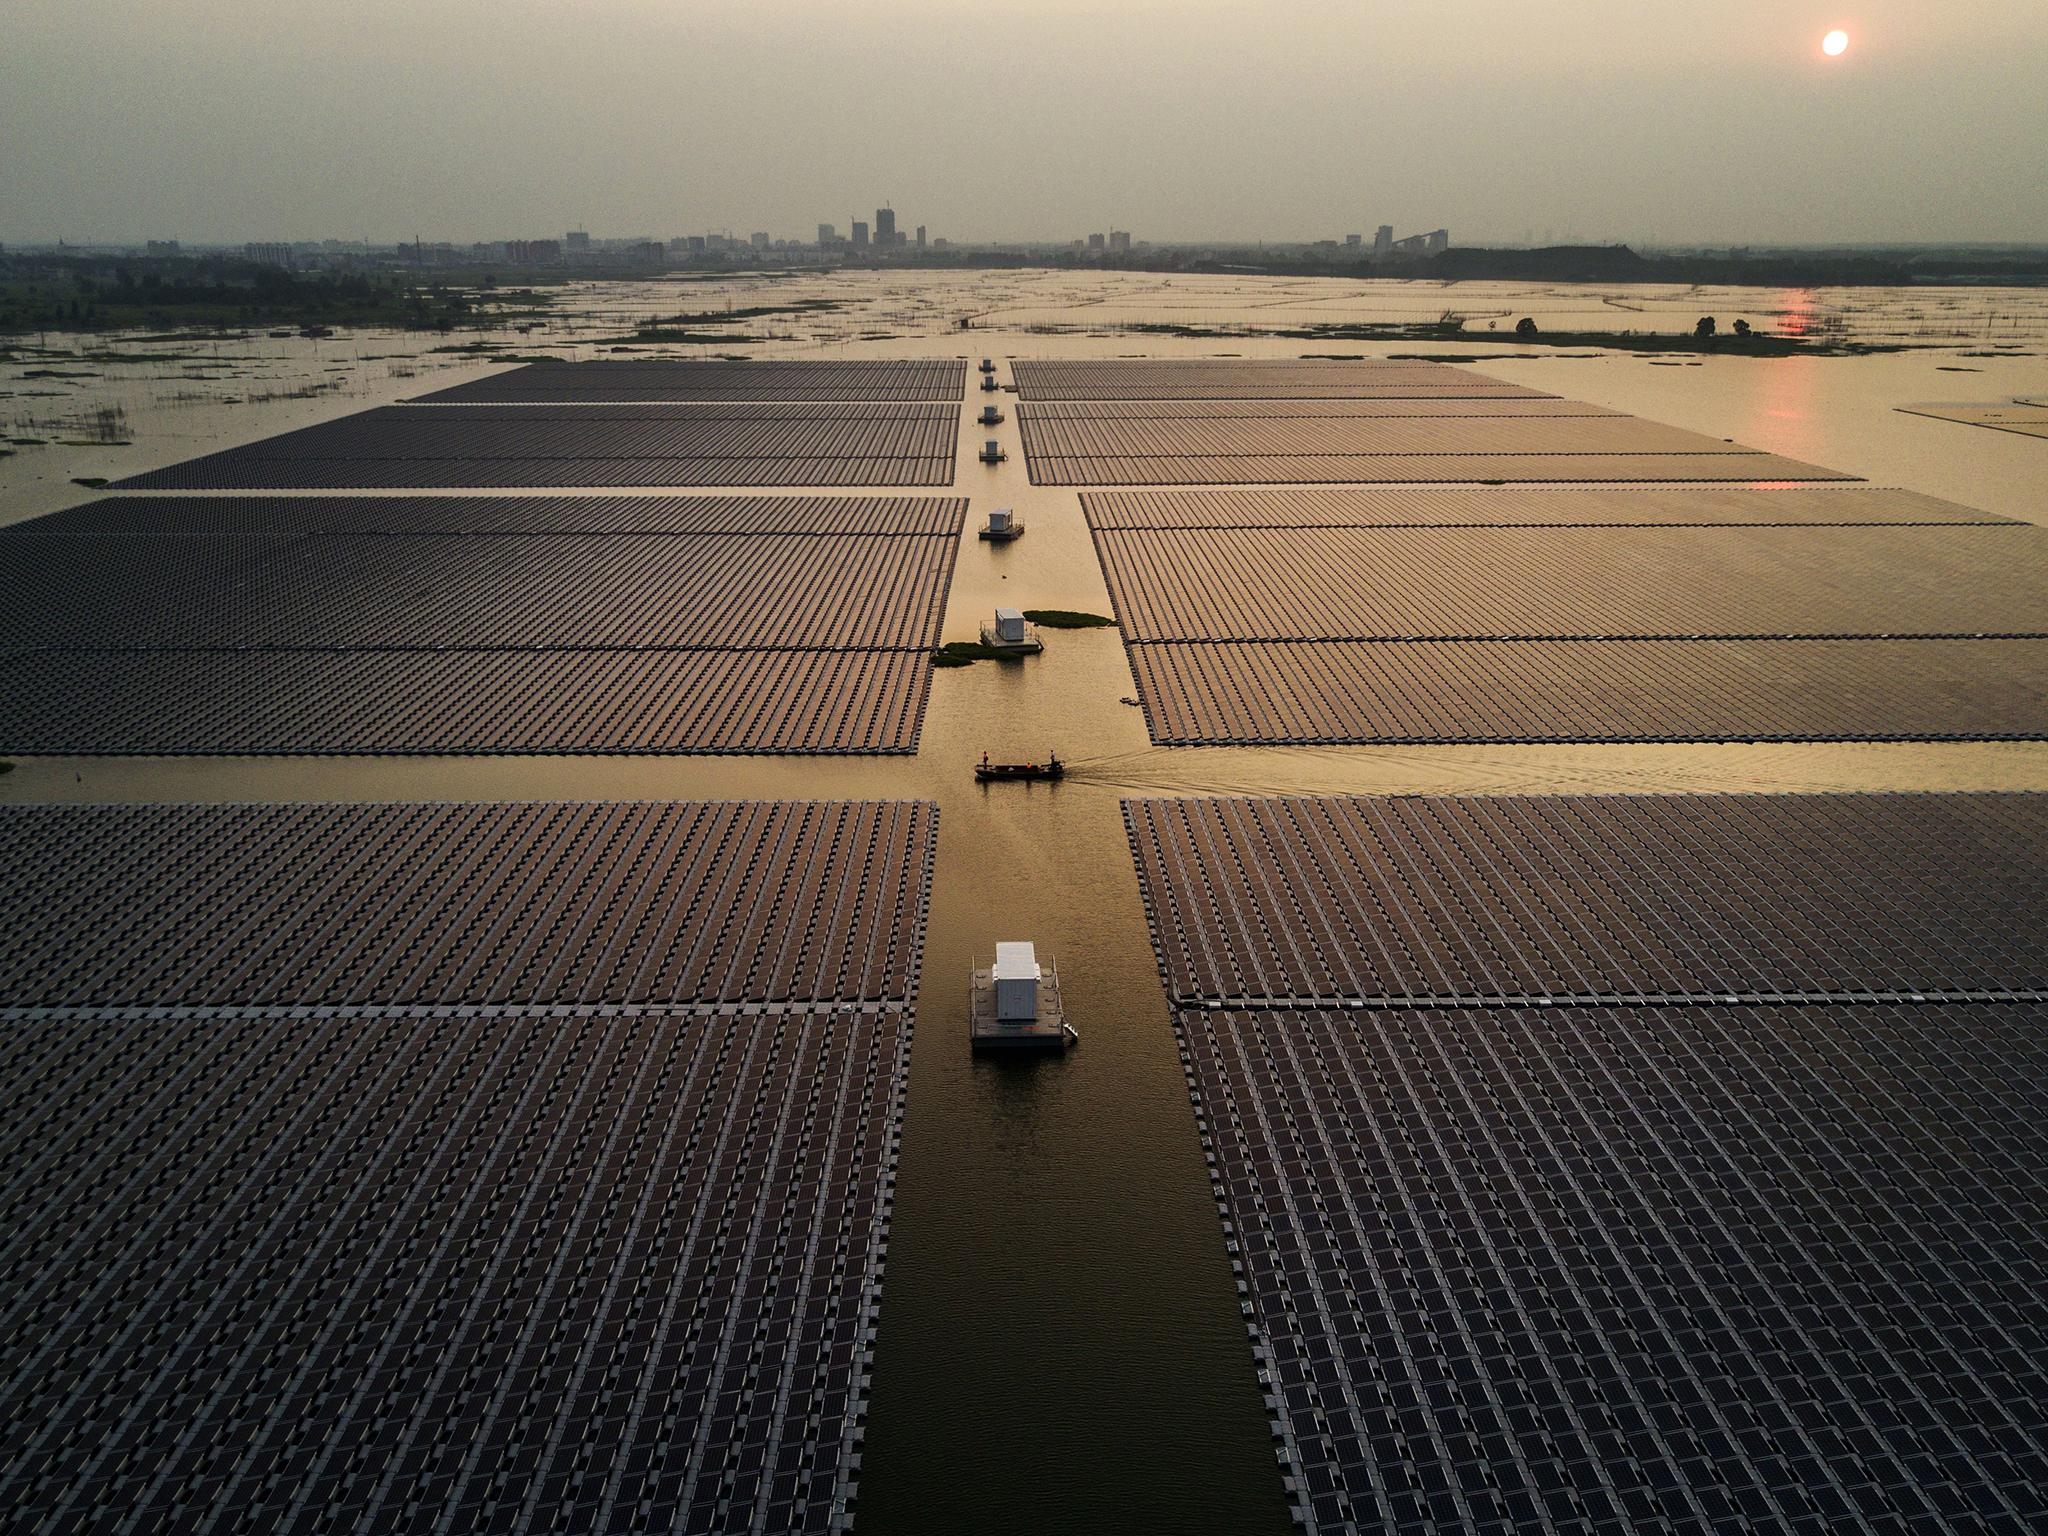 China has gone to great lengths to transform itself into a green energy pioneer, and has built the world’s largest floating solar farm